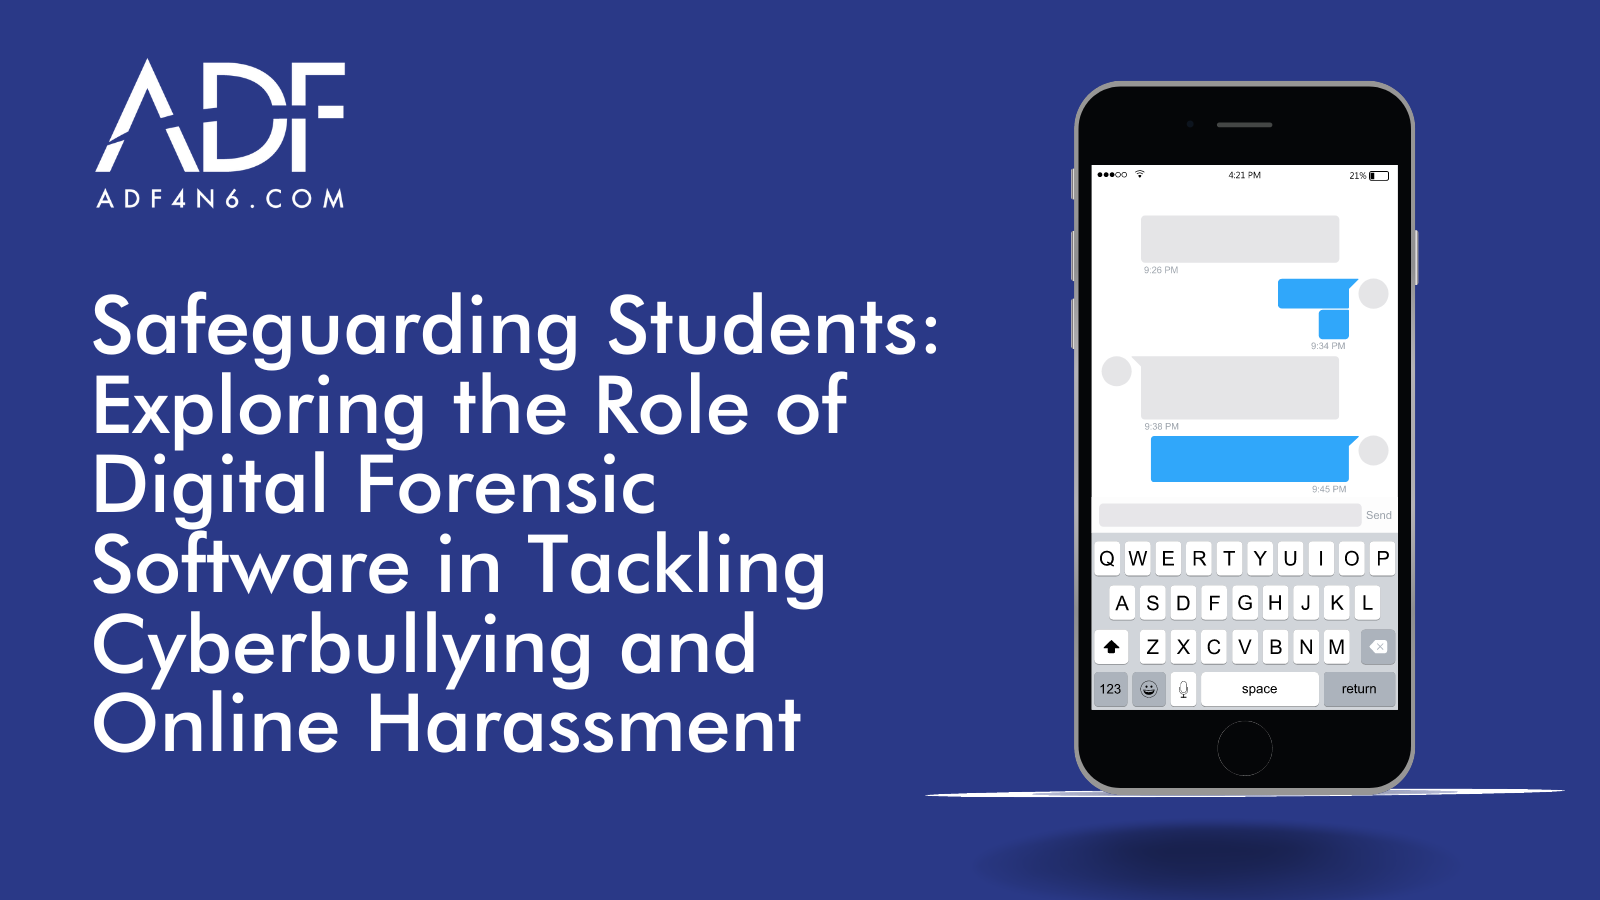 Safeguarding Students: Digital Forensic Software Against Cyberbullying